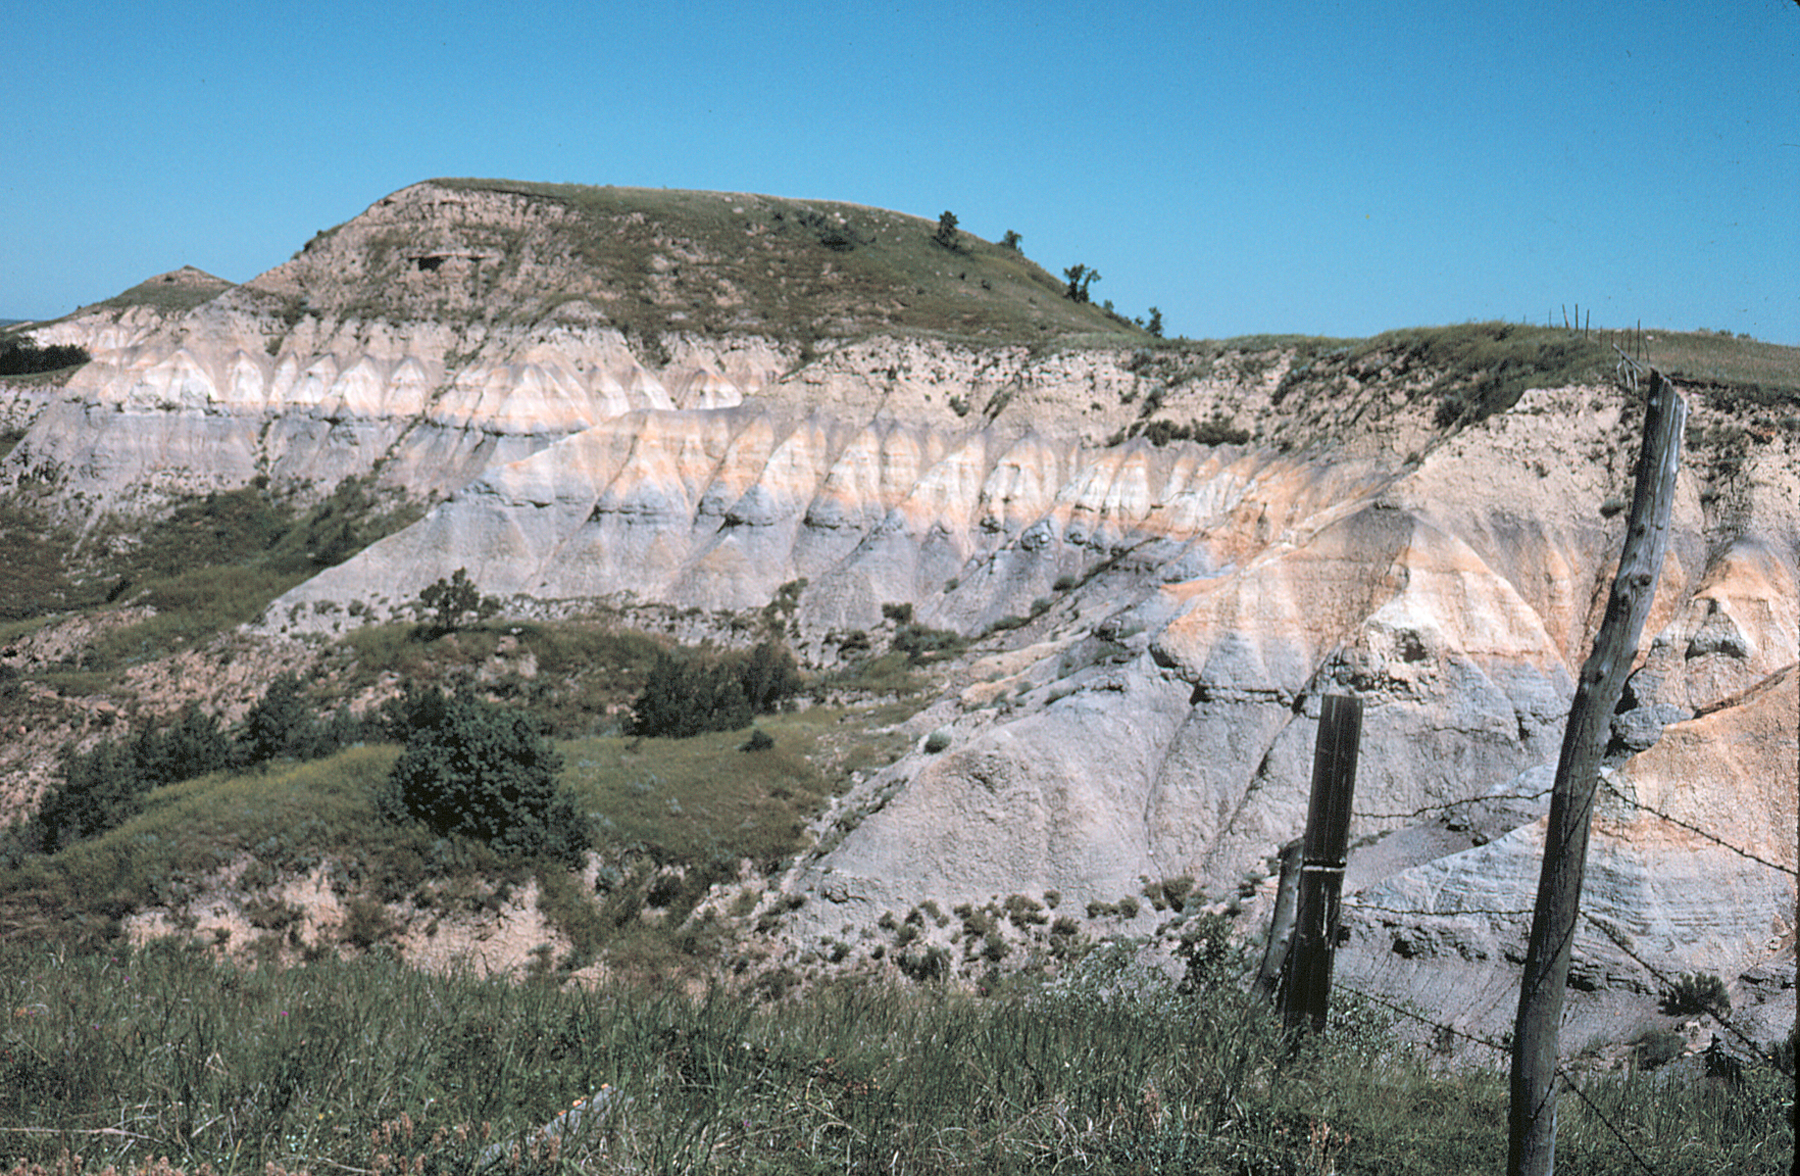 Critical minerals are typically enriched in the lower part of the bright bed and the underlying coals of the Bear Den Member of the Golden Valley Fm, western ND.